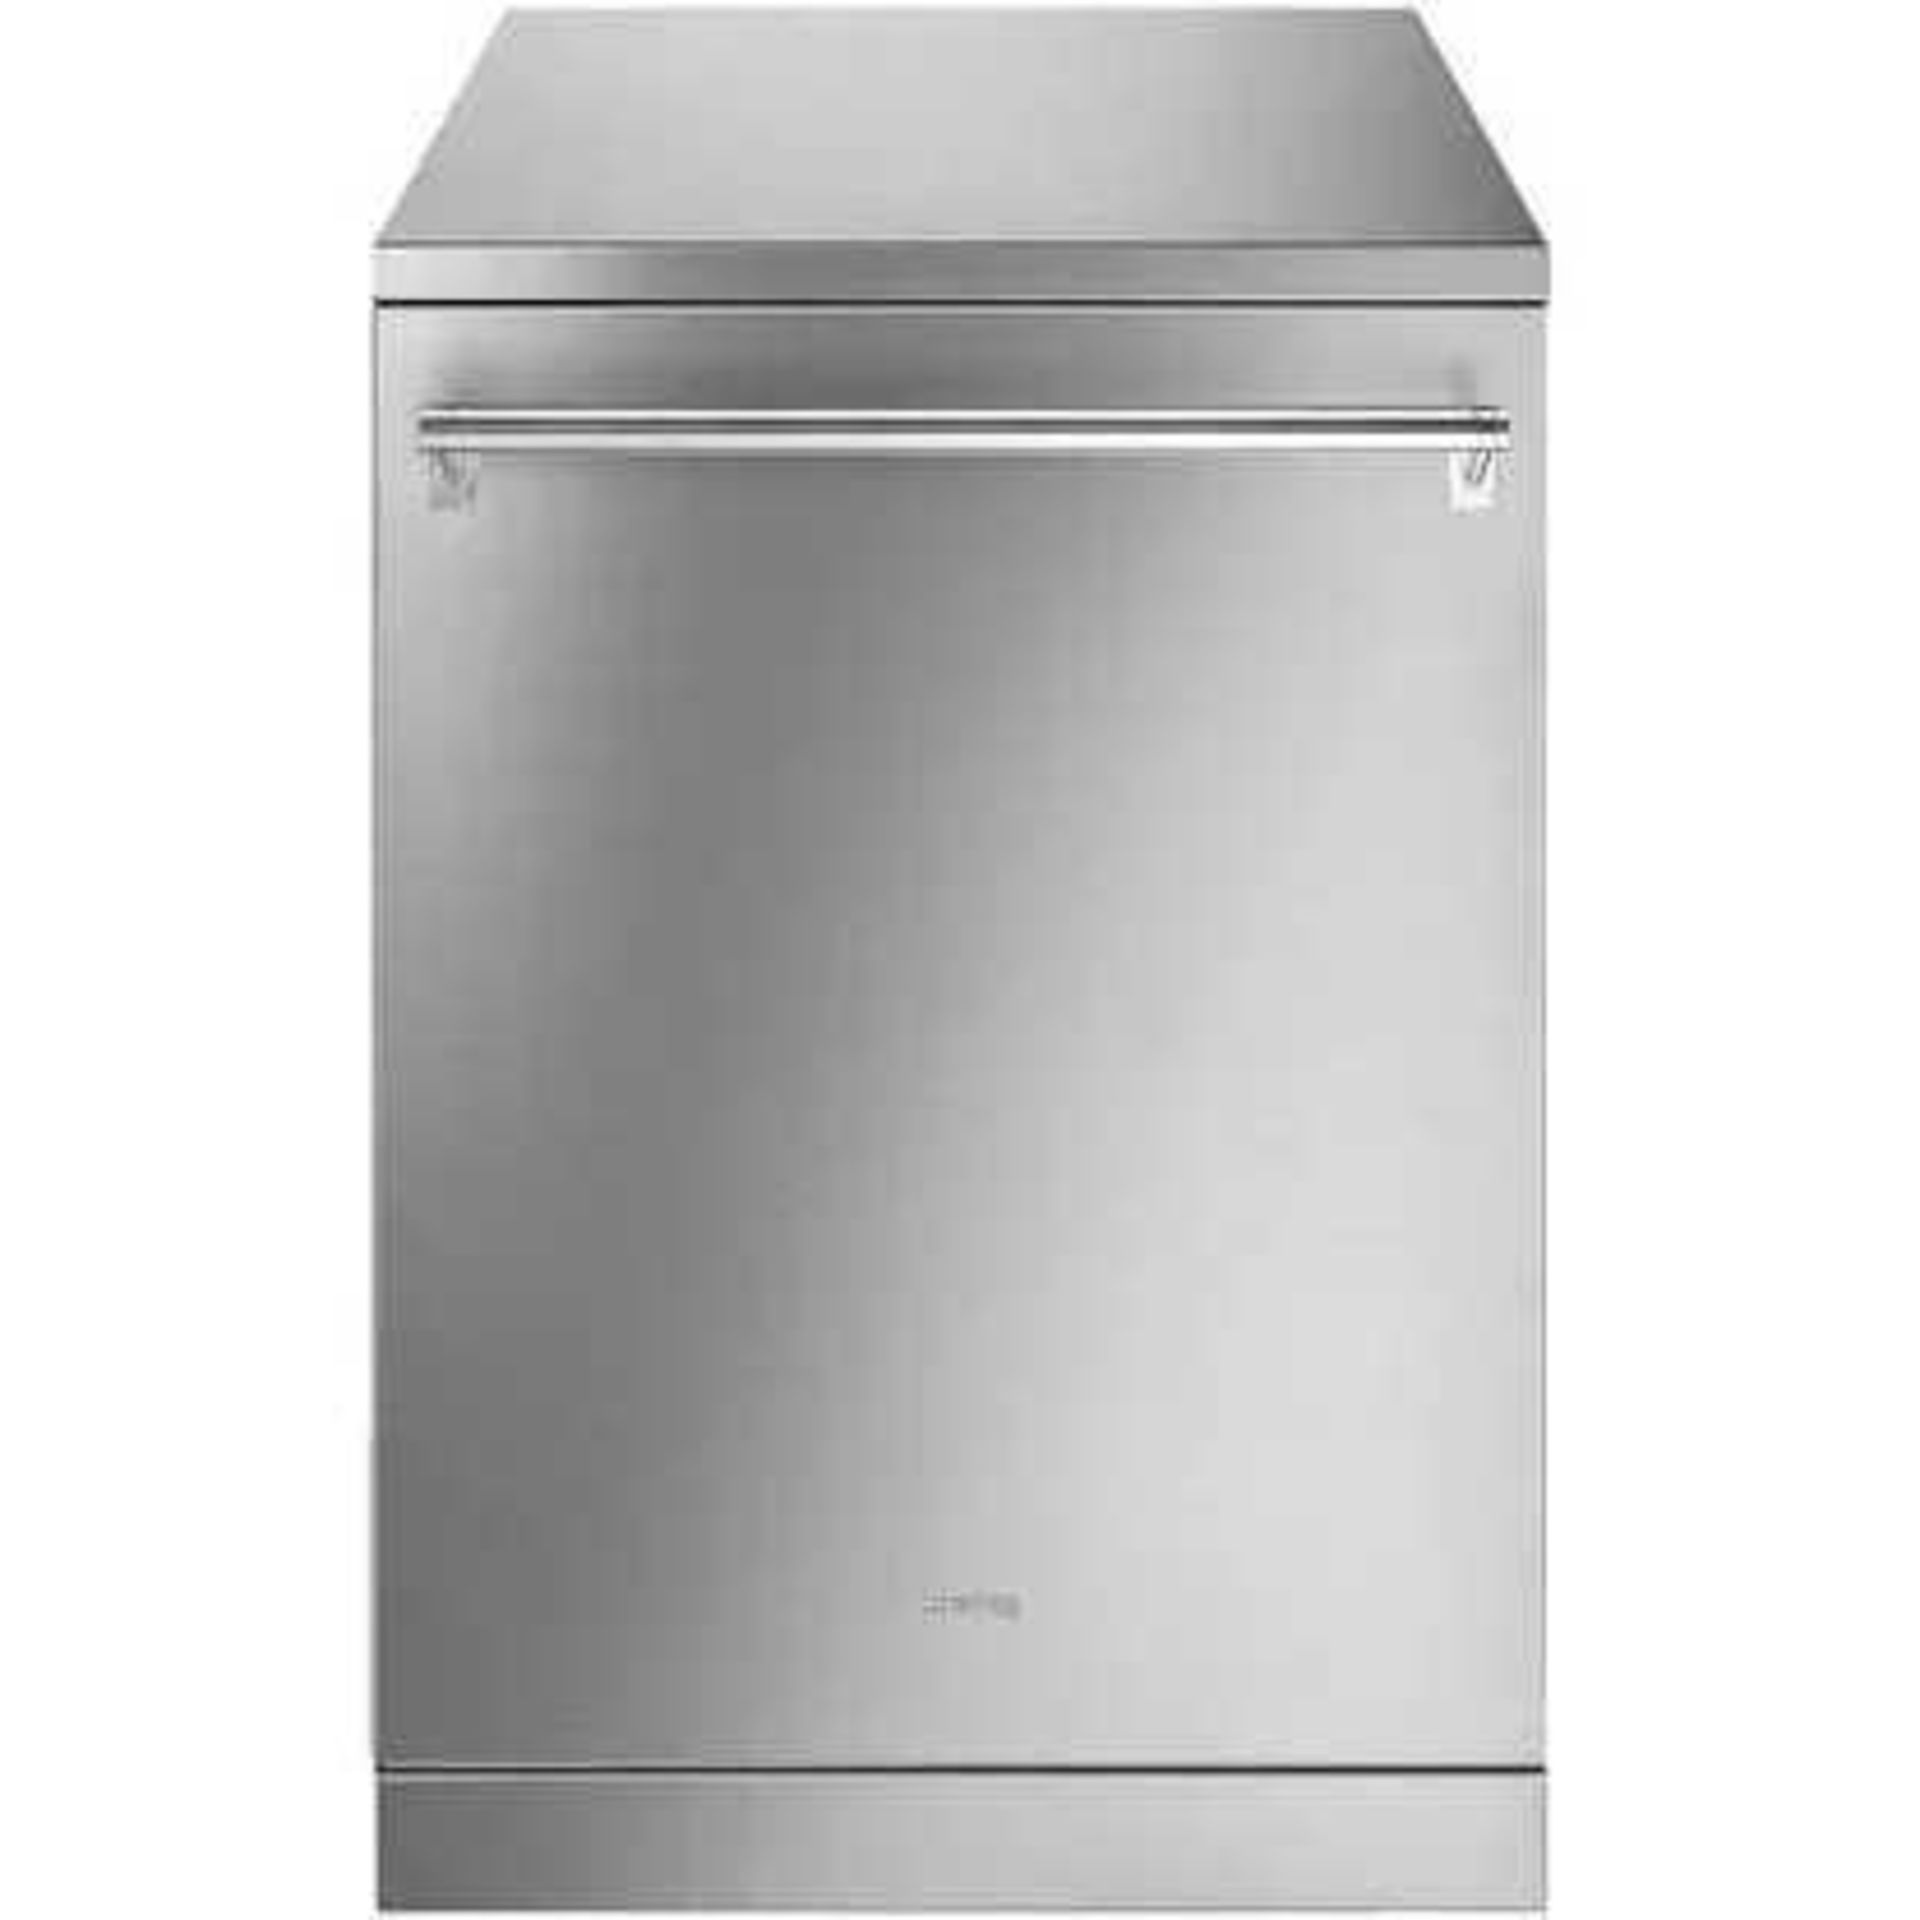 (Dd) RRP £555 Lot To Contain 1Smeg Dfa13T3X Dishwasher - Stainless Steel